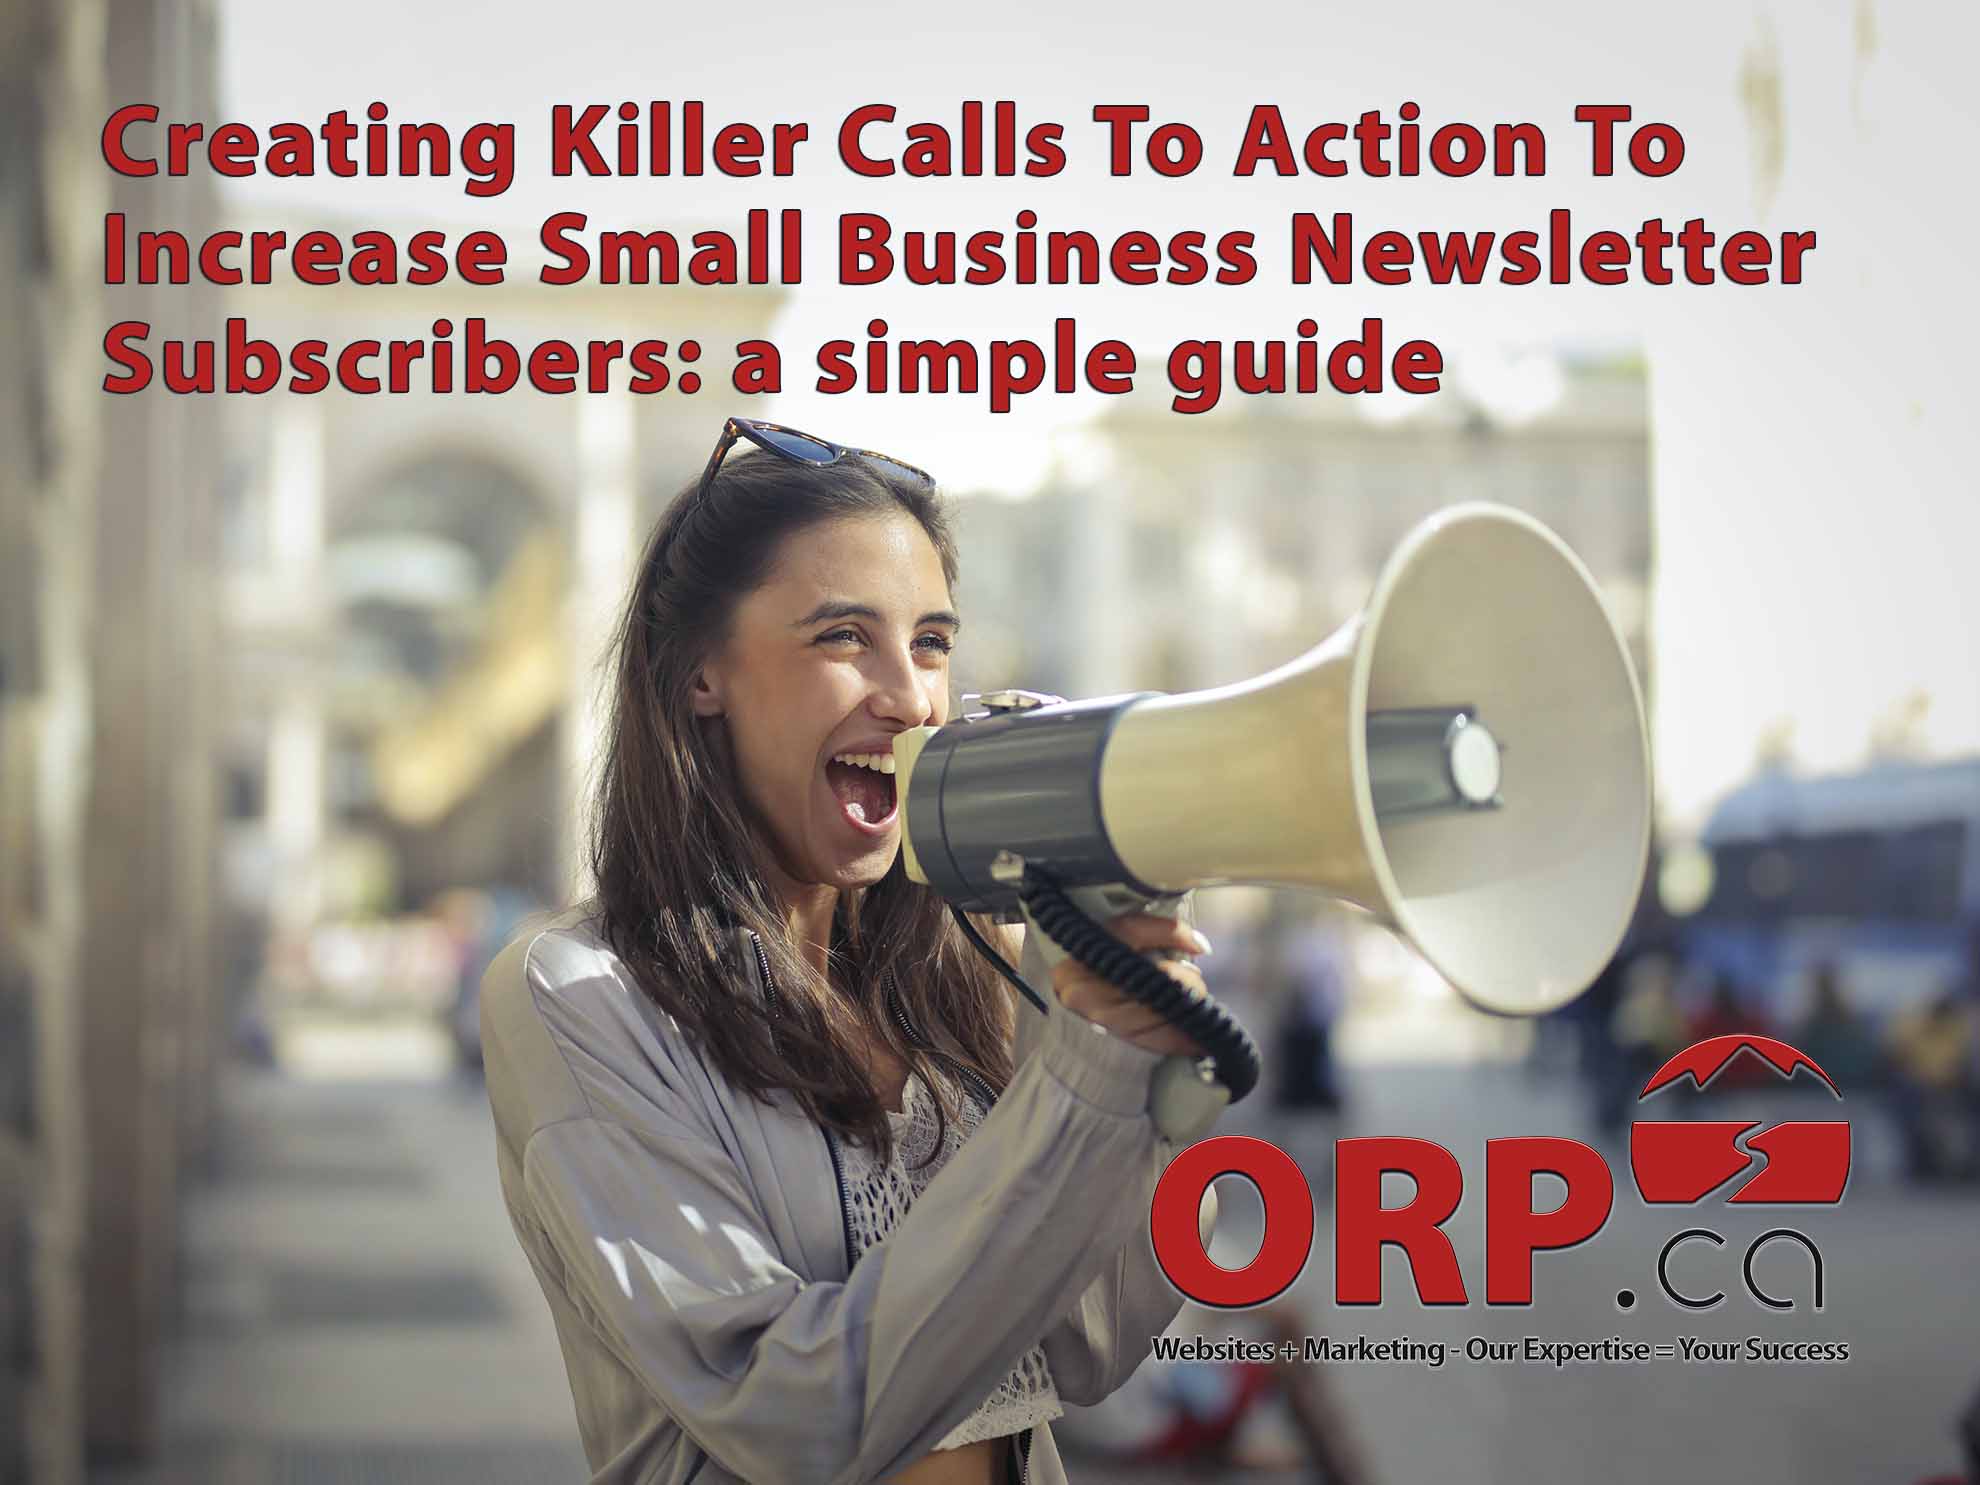 Creating Killer Calls To Action To Increase Small Business Newsletter Subscribers a simple guide from ORP.ca Websites + Marketing: Our Expertise  = Your Success - Services for Small Business and Business Professionals"